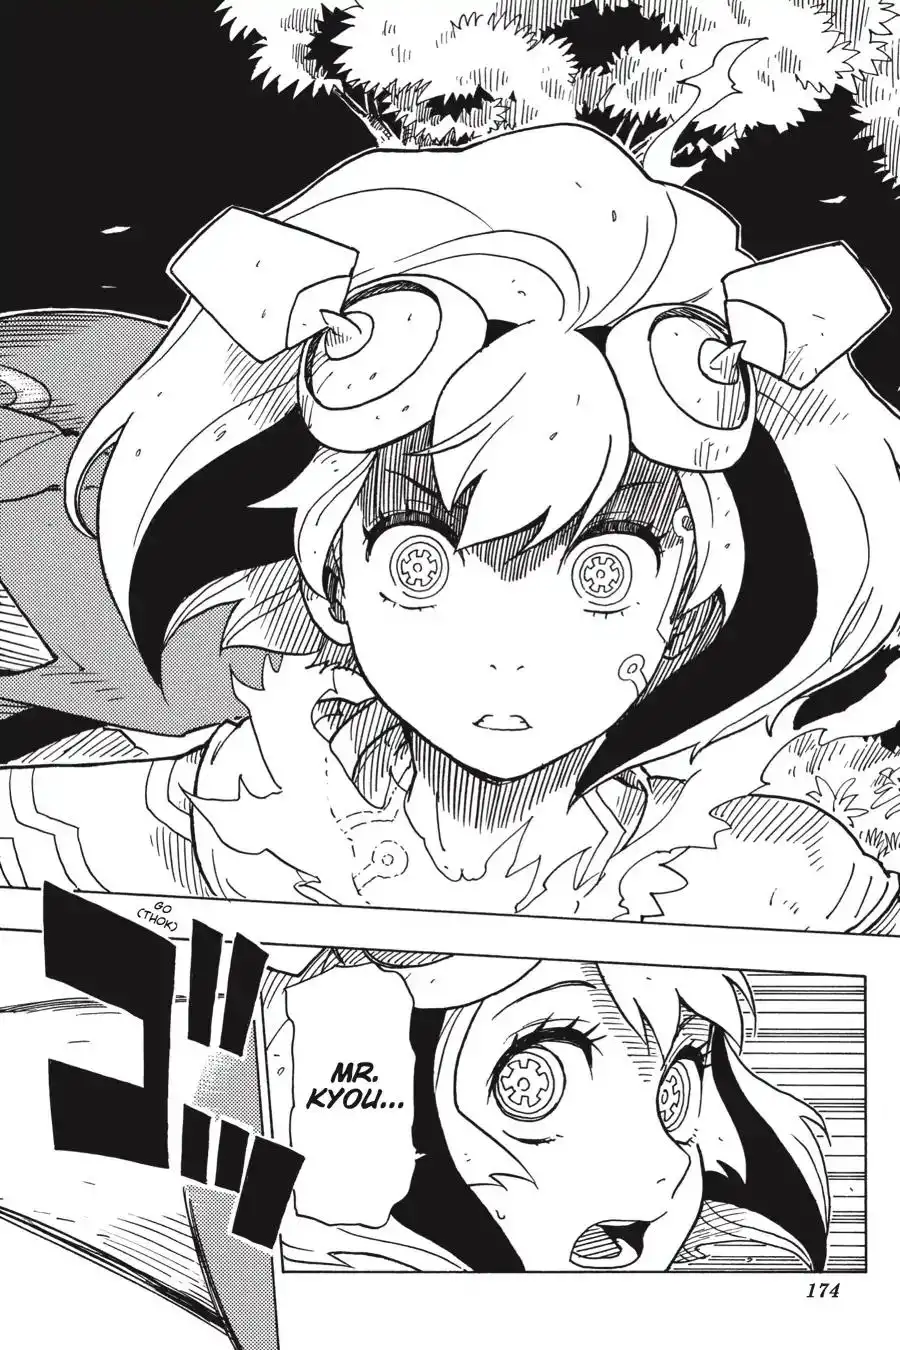 Dimension W Chapter 96